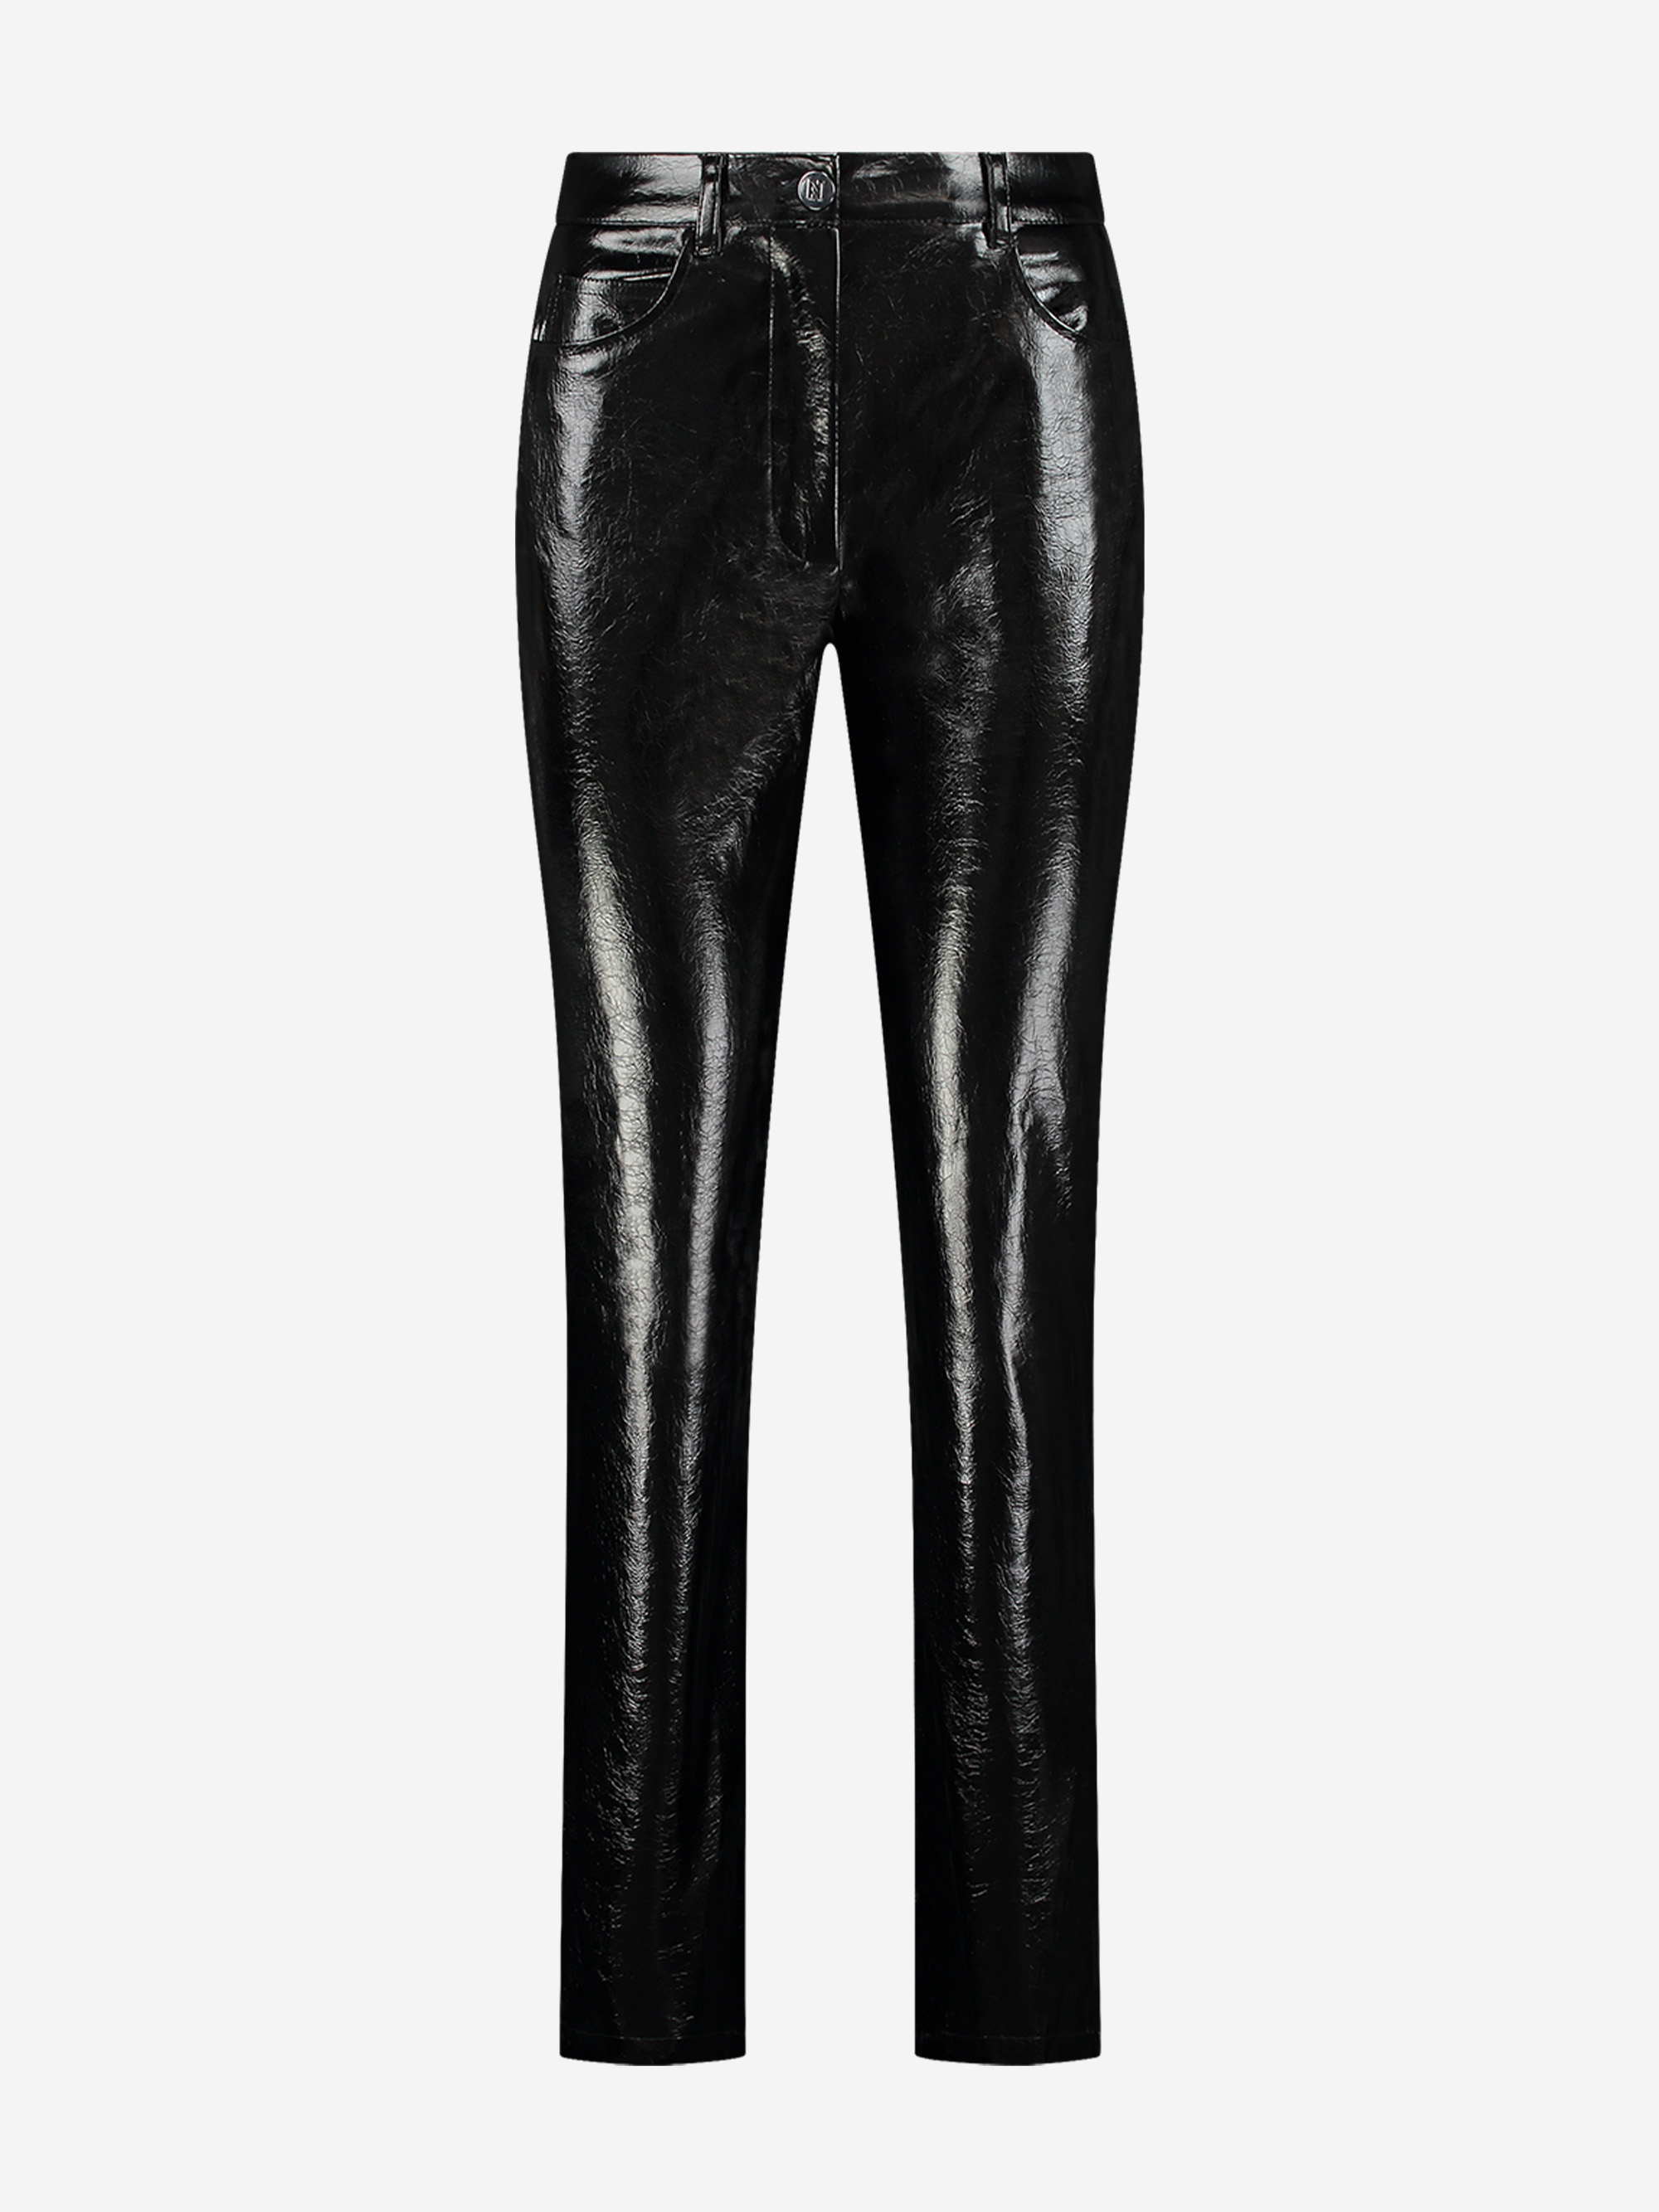  Straight Lacquer pants with mid rise